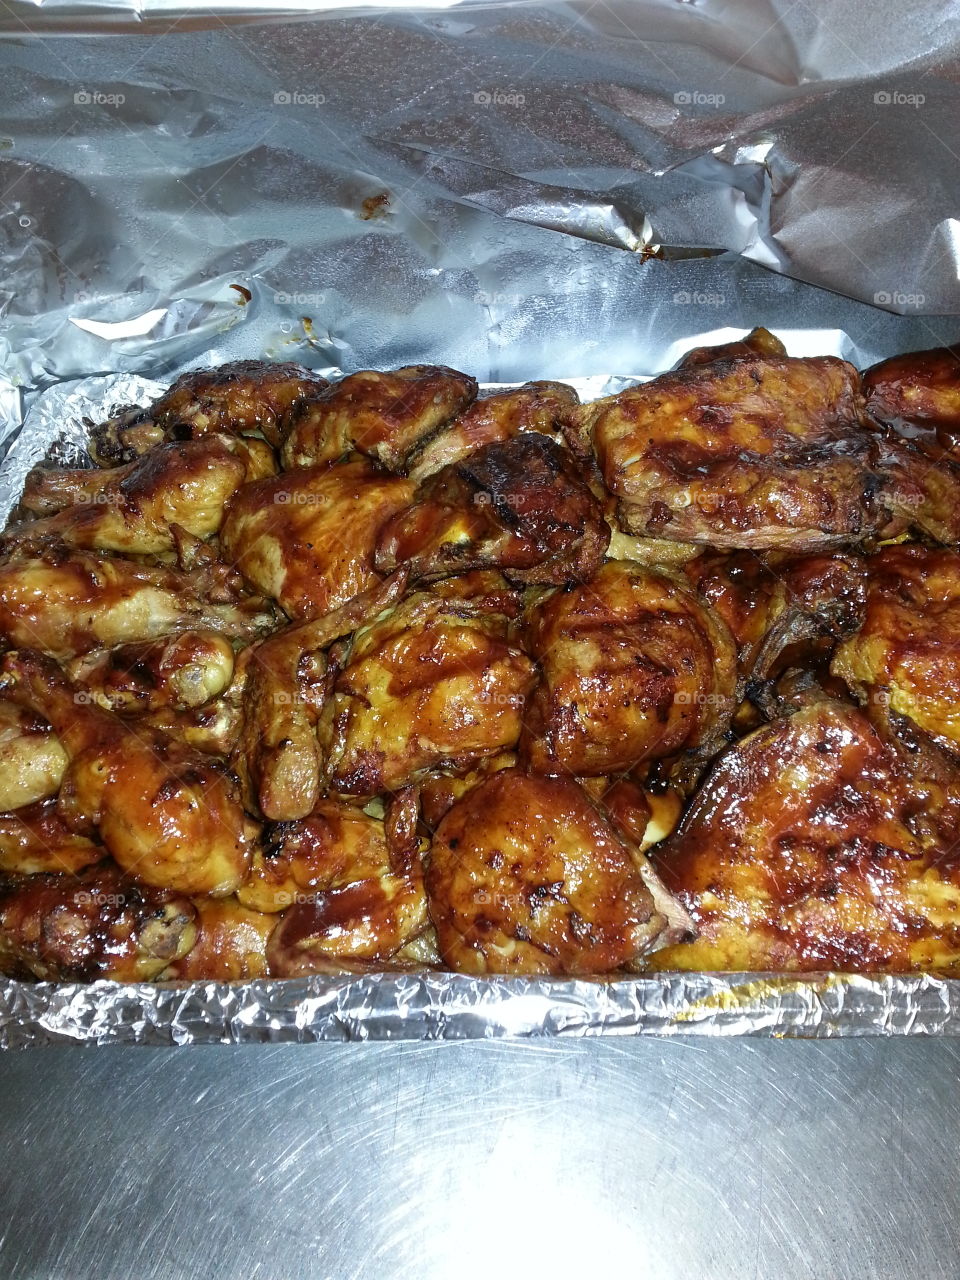 barbecue chicken straight off the smoker grill!